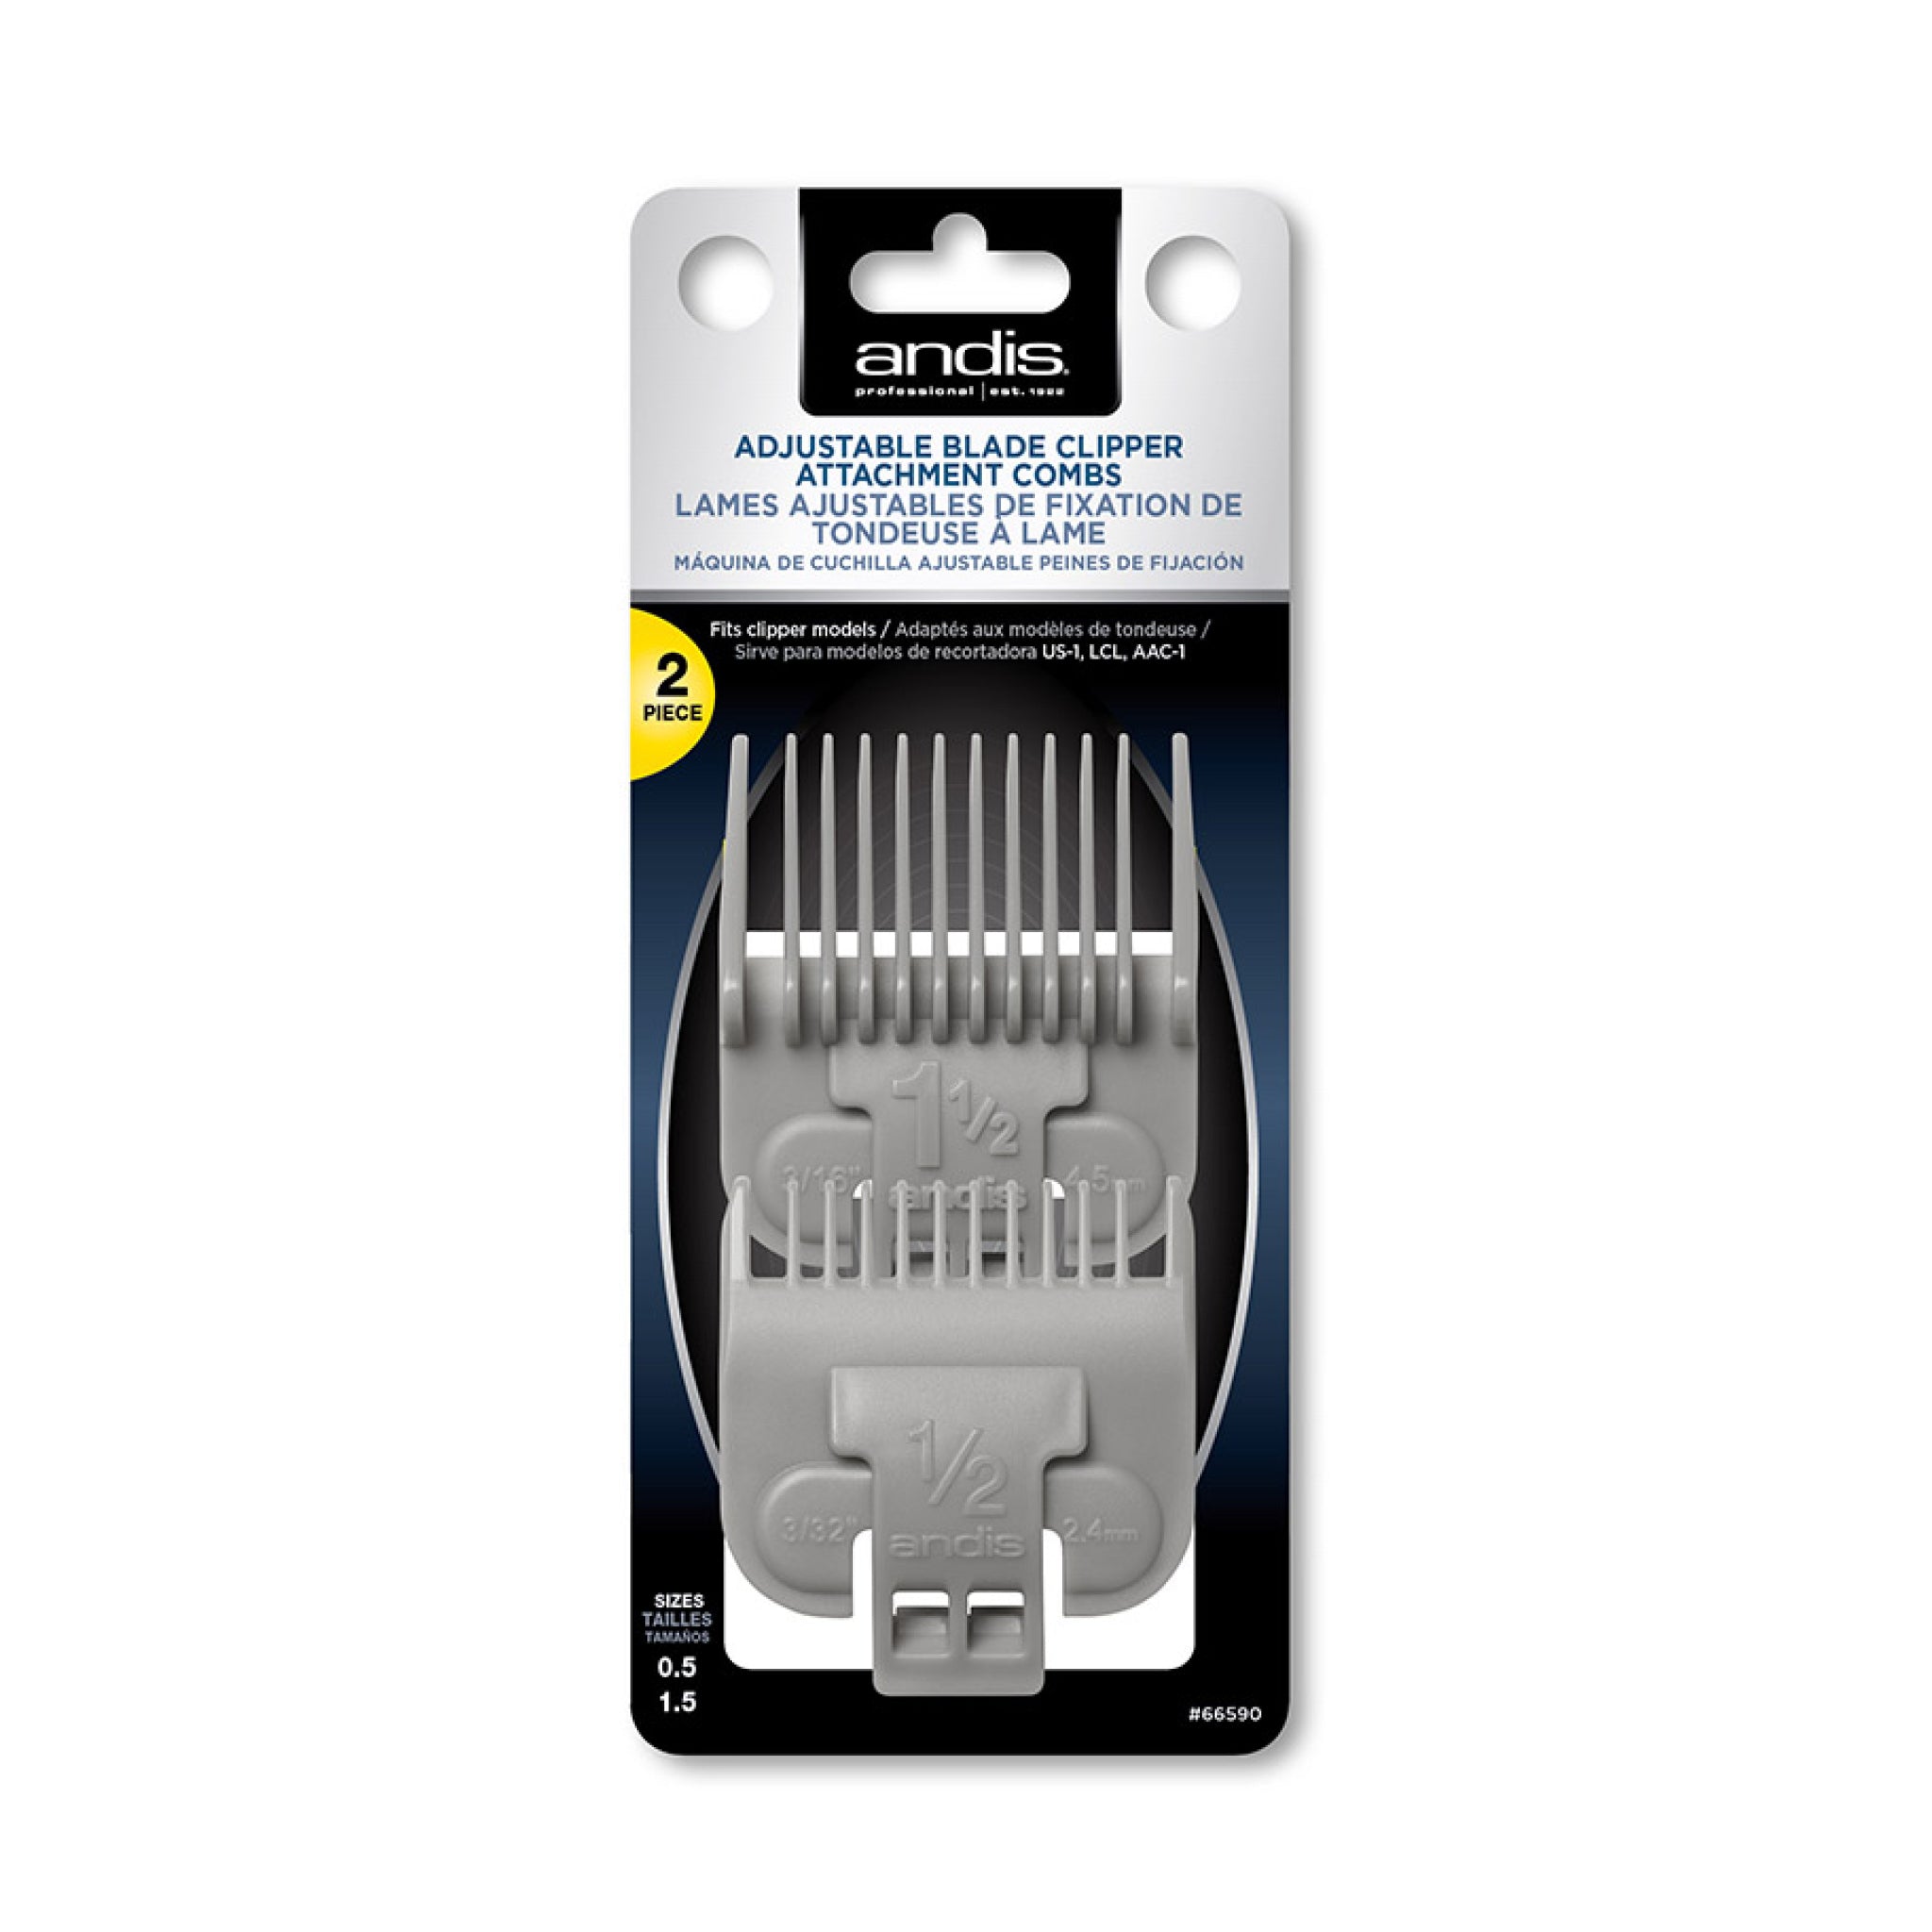 Andis Adjustable Blade Clipper Attachment Combs - 2 pc